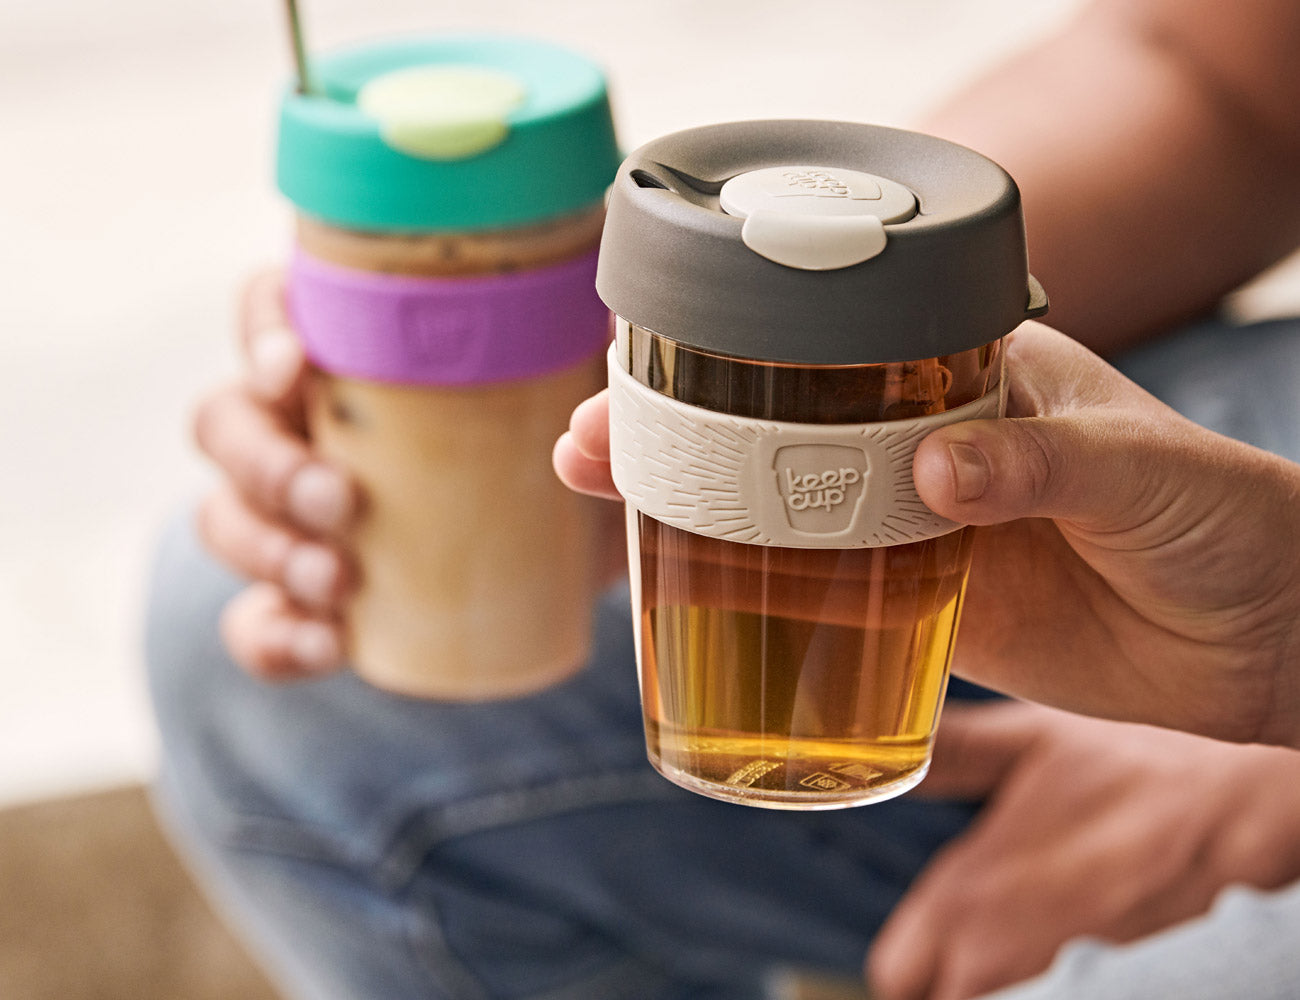 KeepCup blends the best elements of disposable and reusable coffee